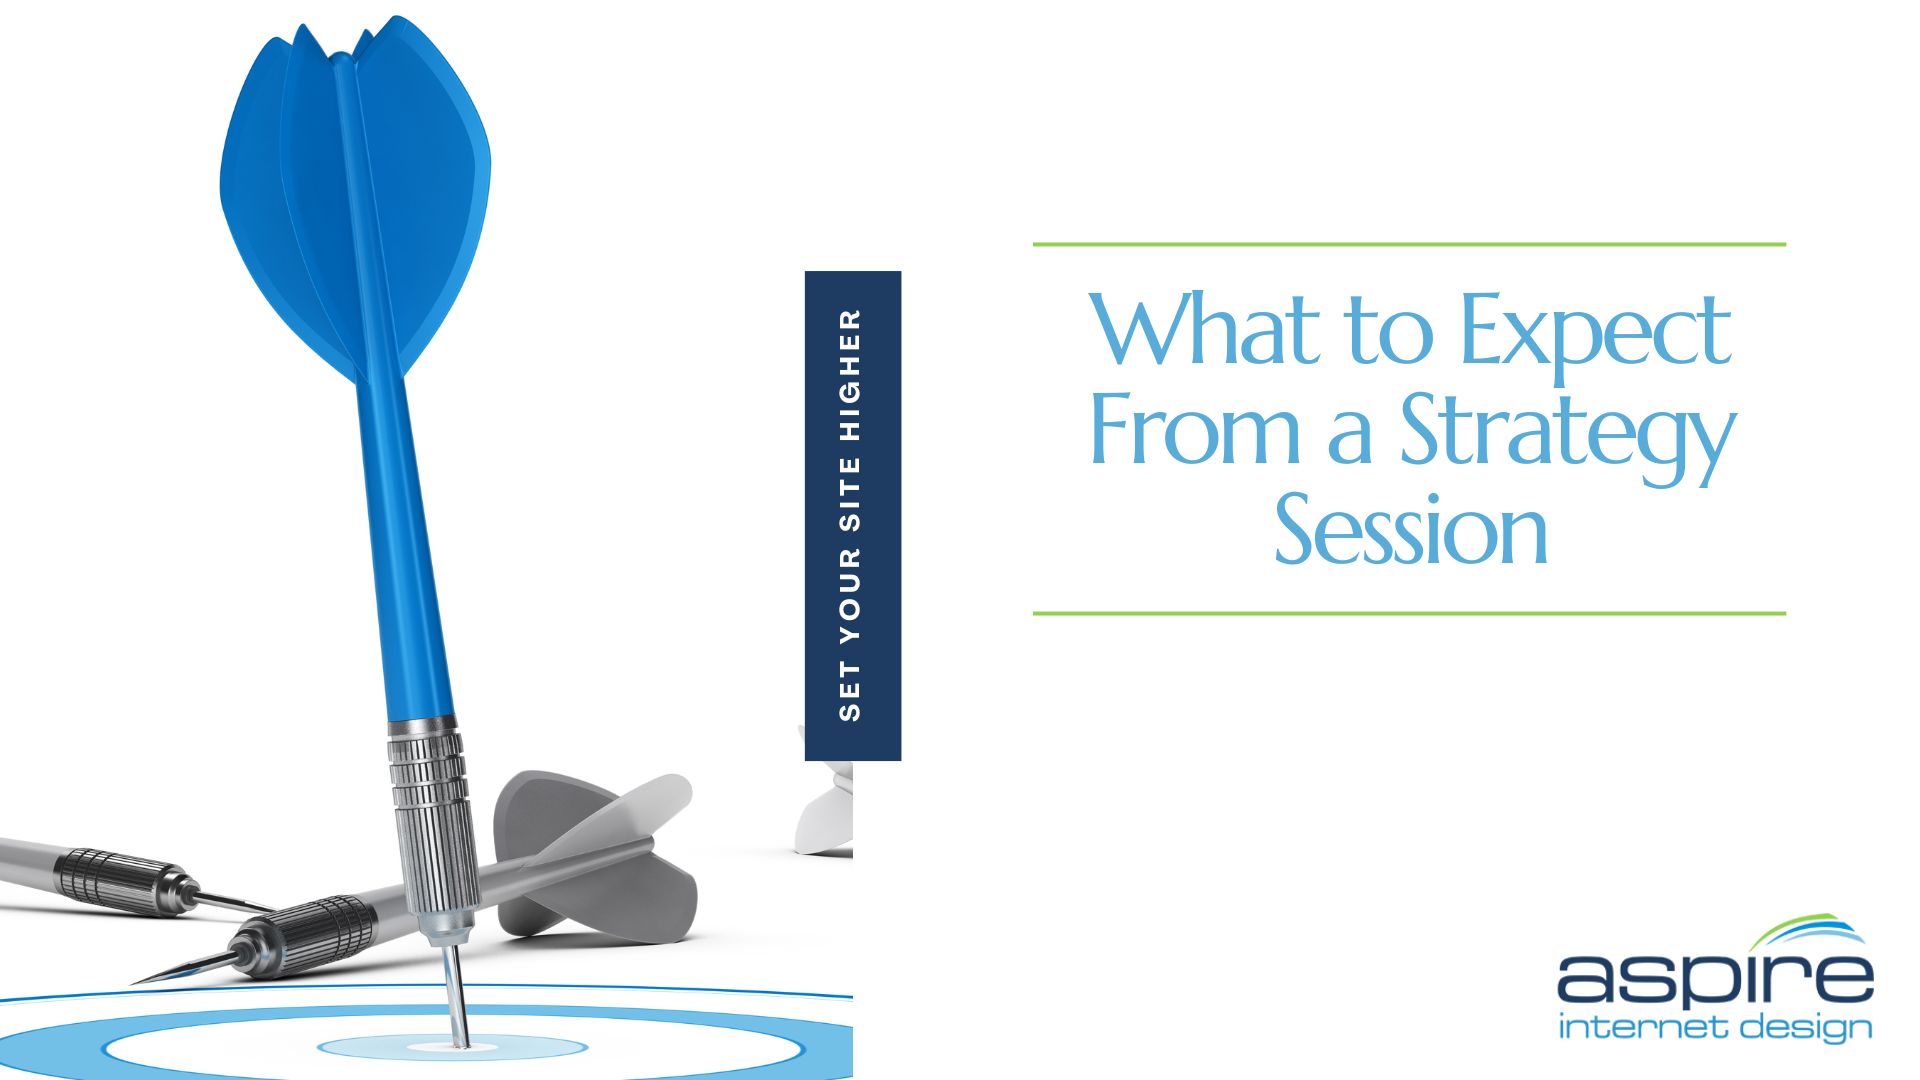 What to Expect from a Strategy Session